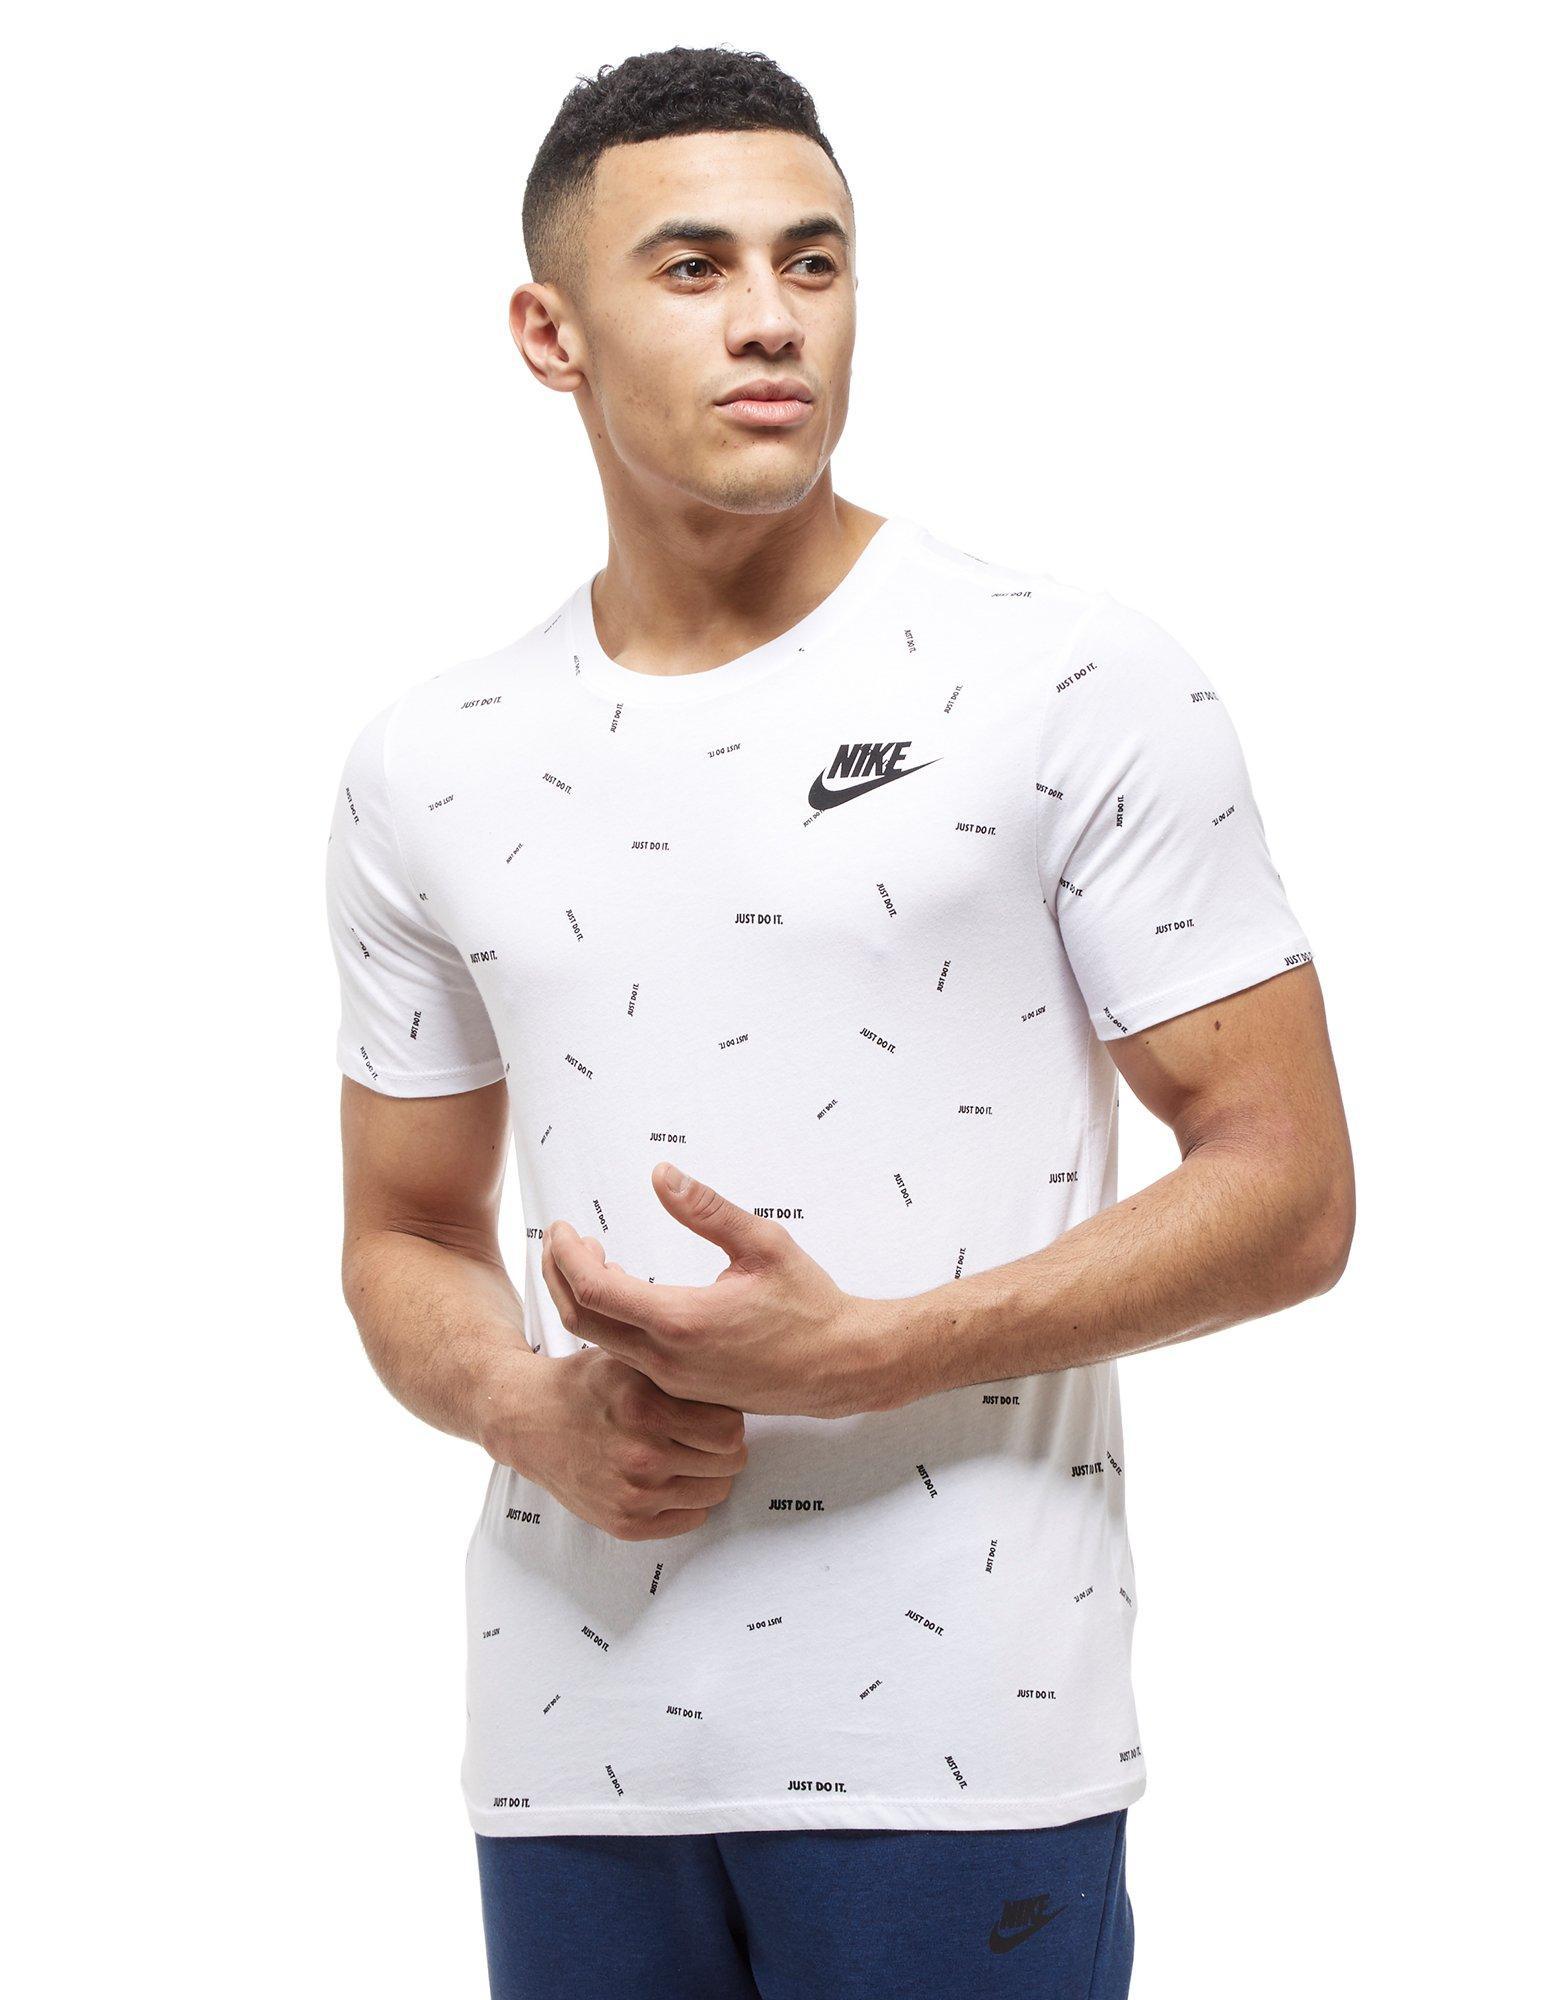 Nike Cotton Just Do It All Over Print T-shirt in White for Men - Lyst